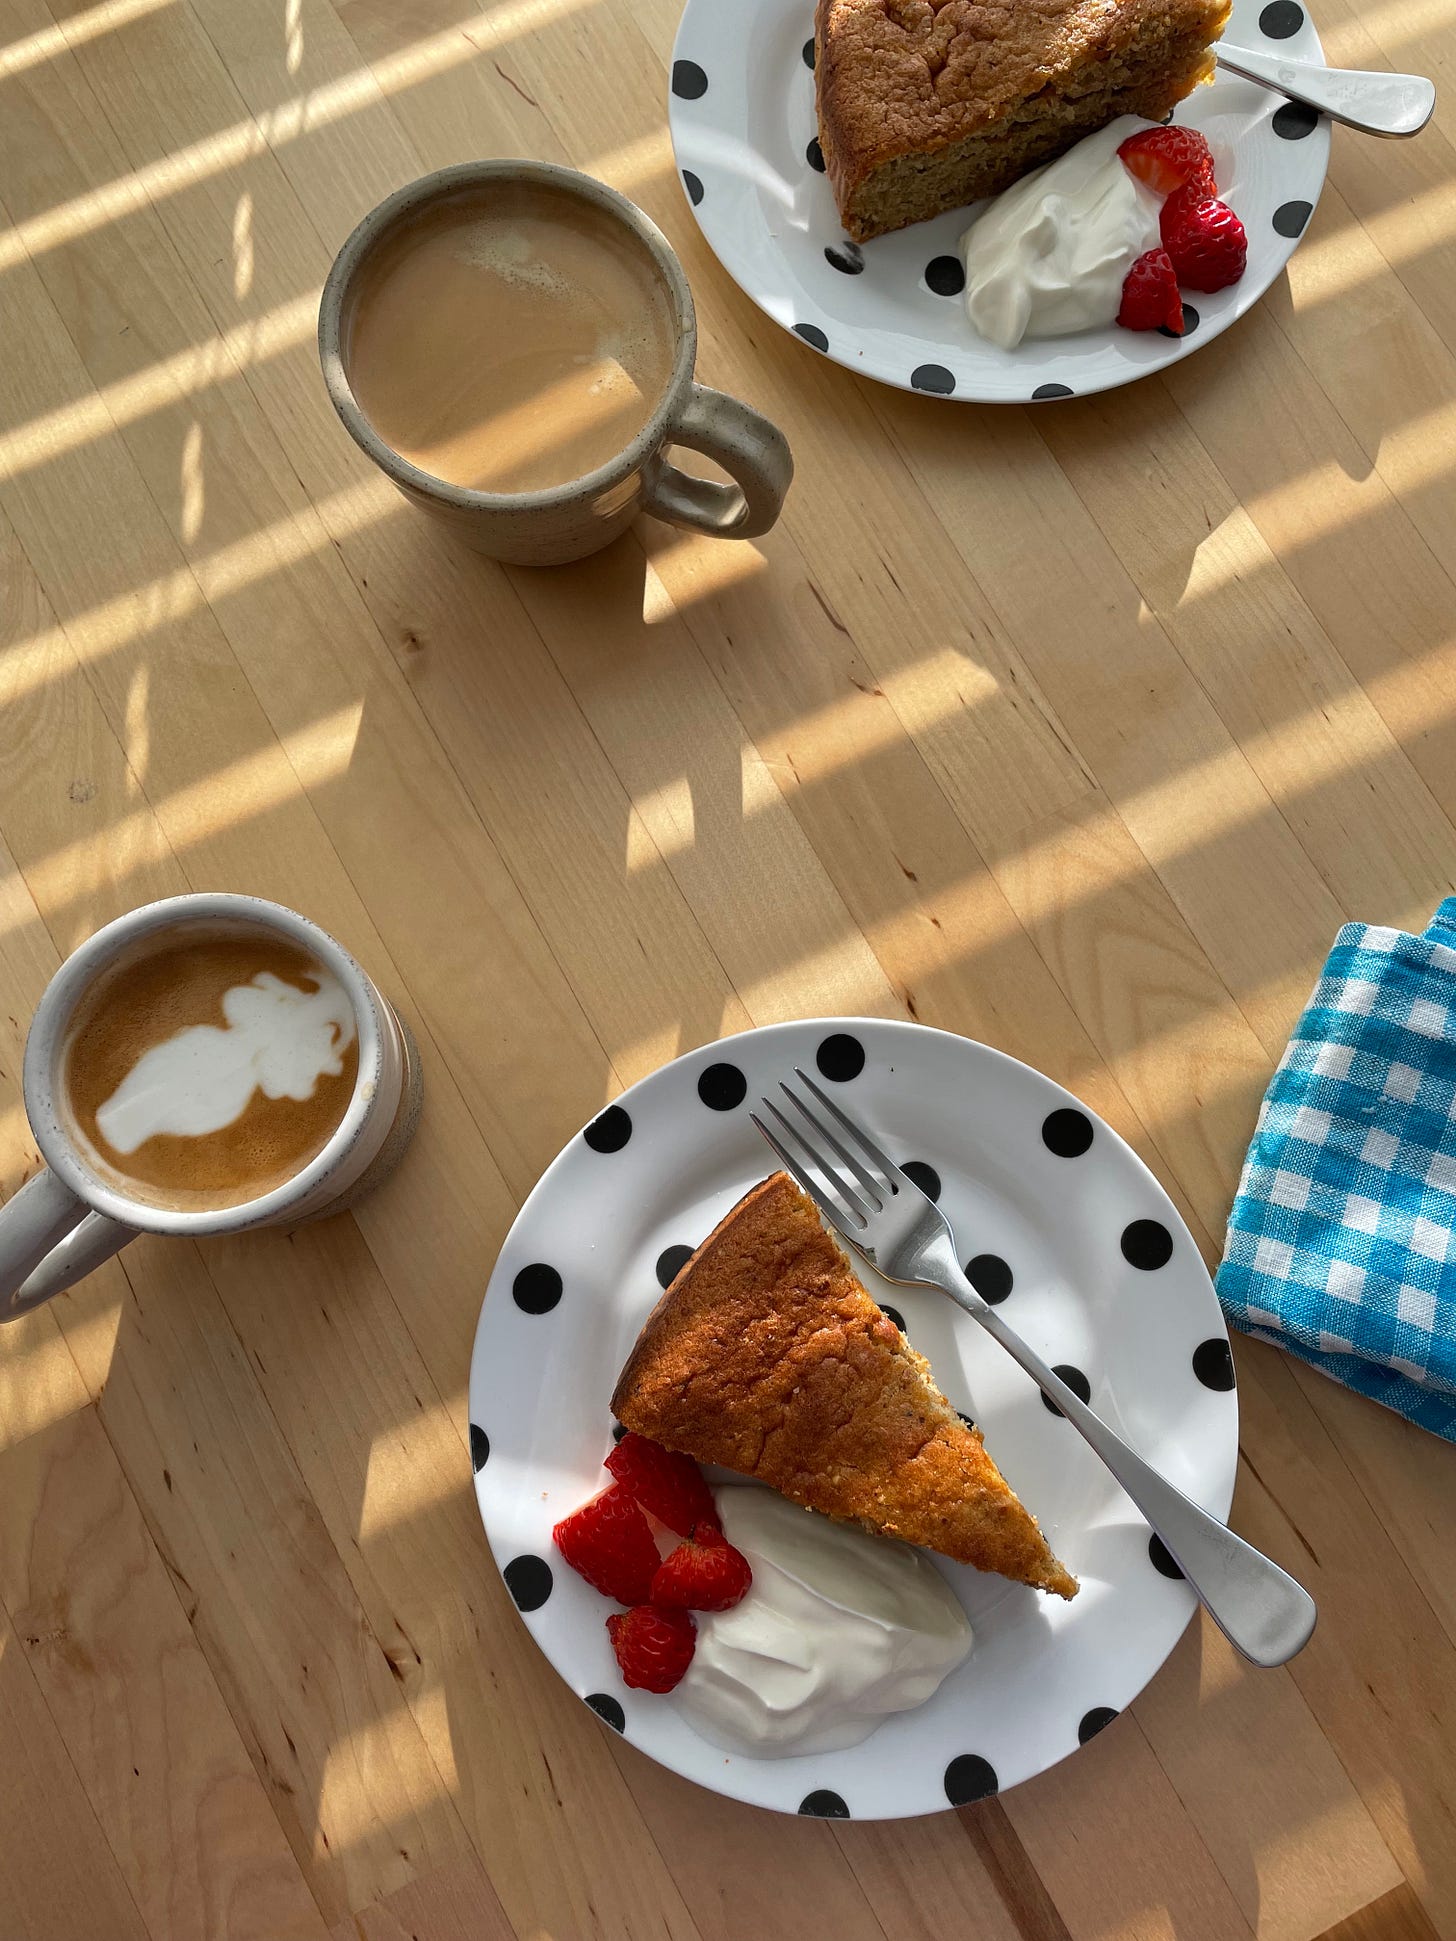 Slices of hazelnut cake with yoghurt and strawberries sitting on a breakfast table with cups of coffee